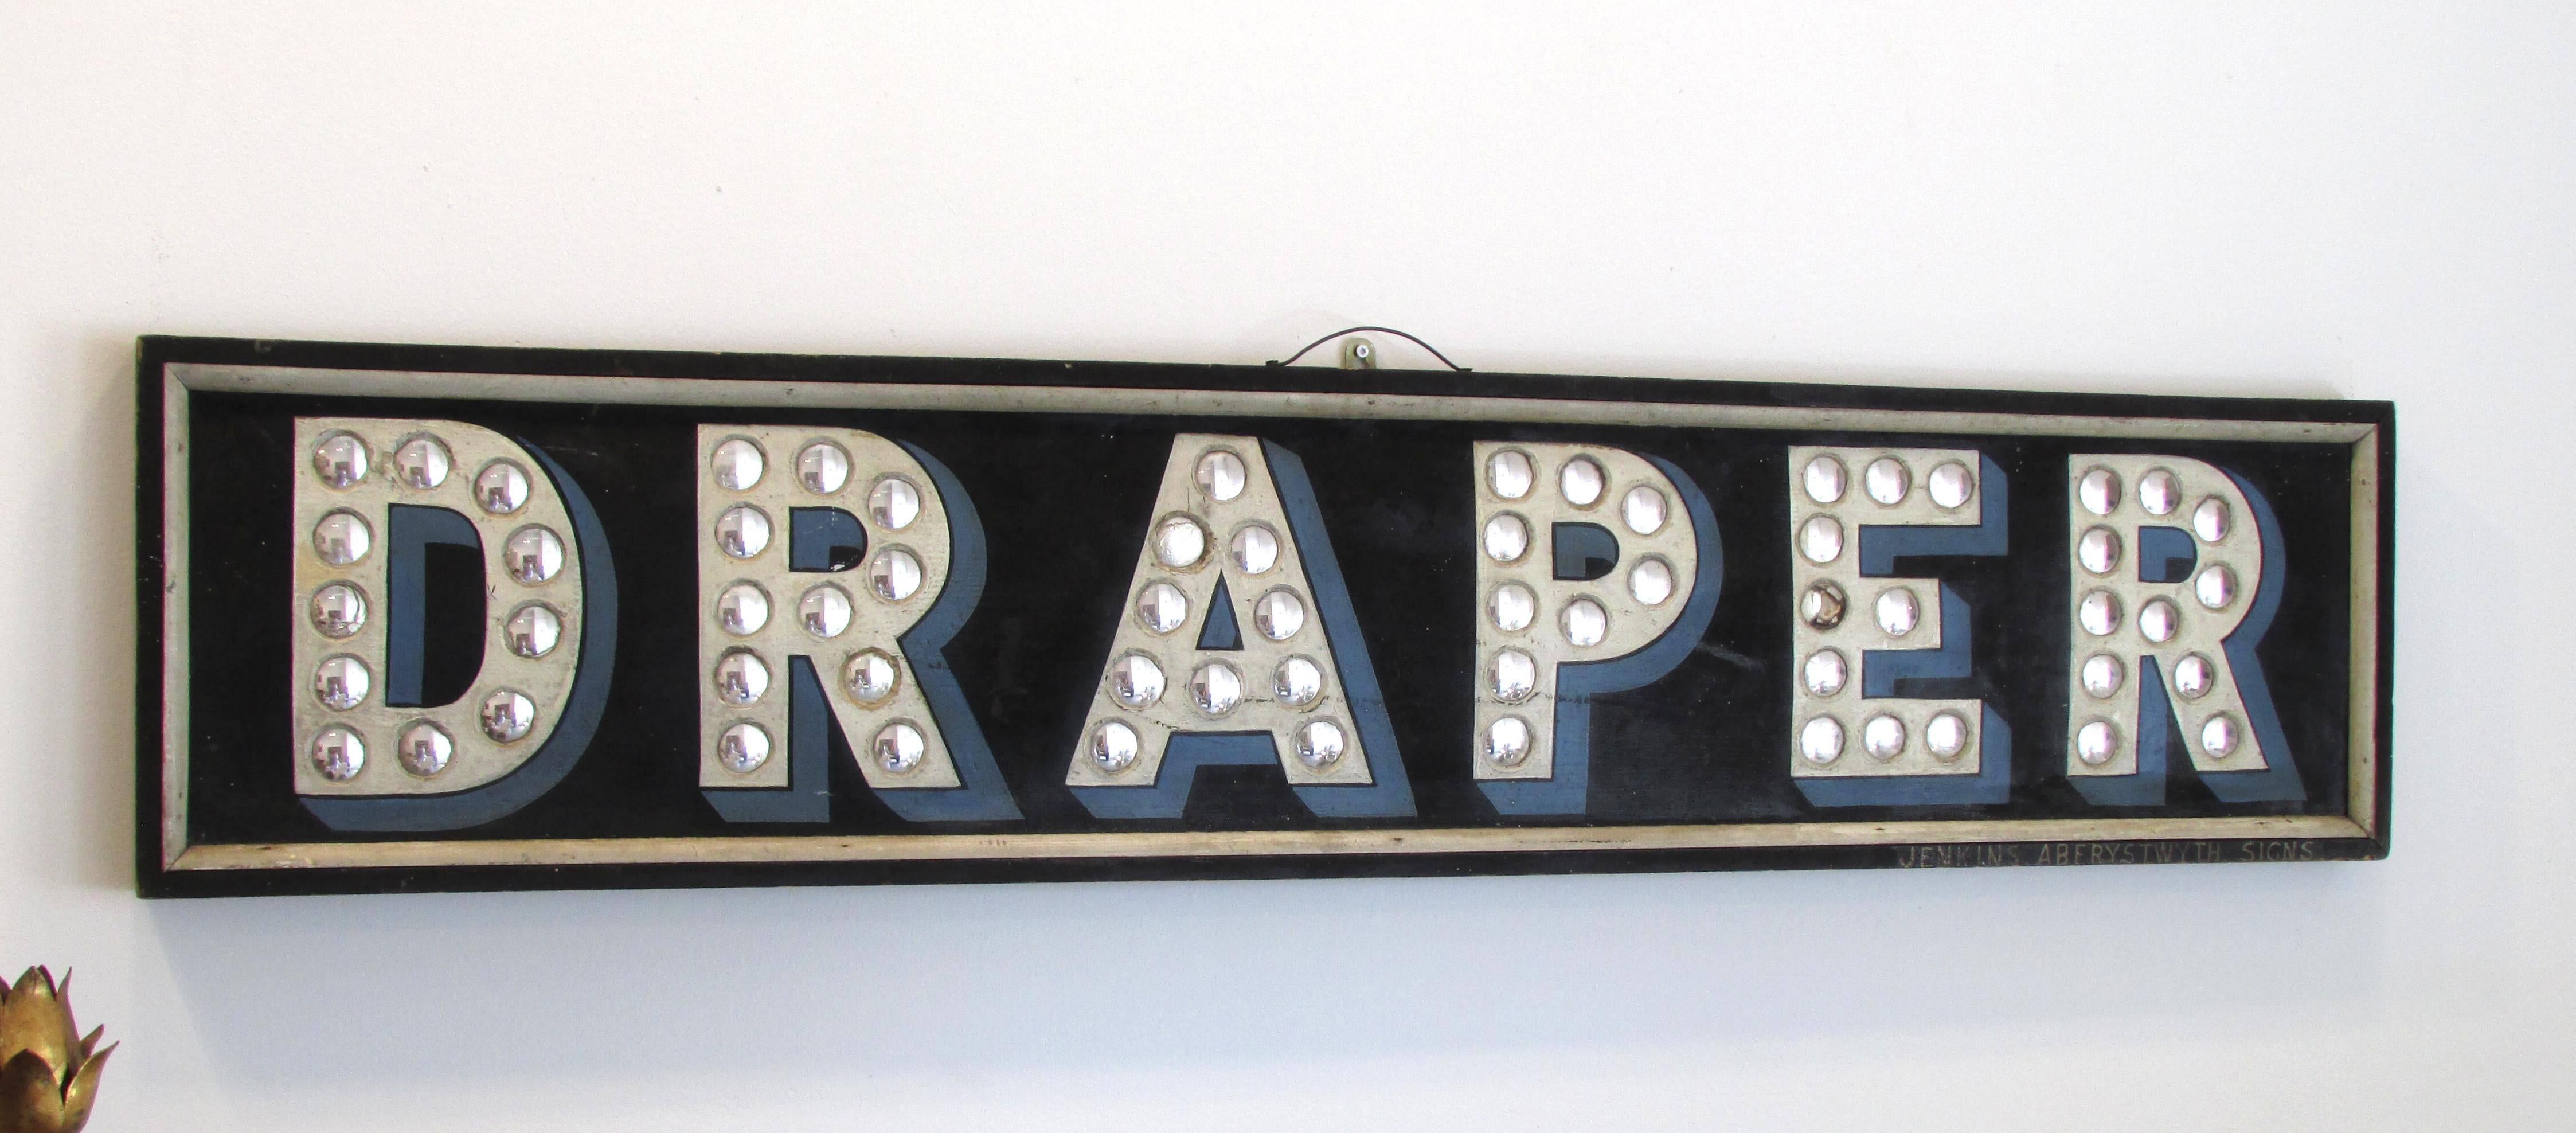 Painted wooden trade sign with small inset convex mirrors spelling out 